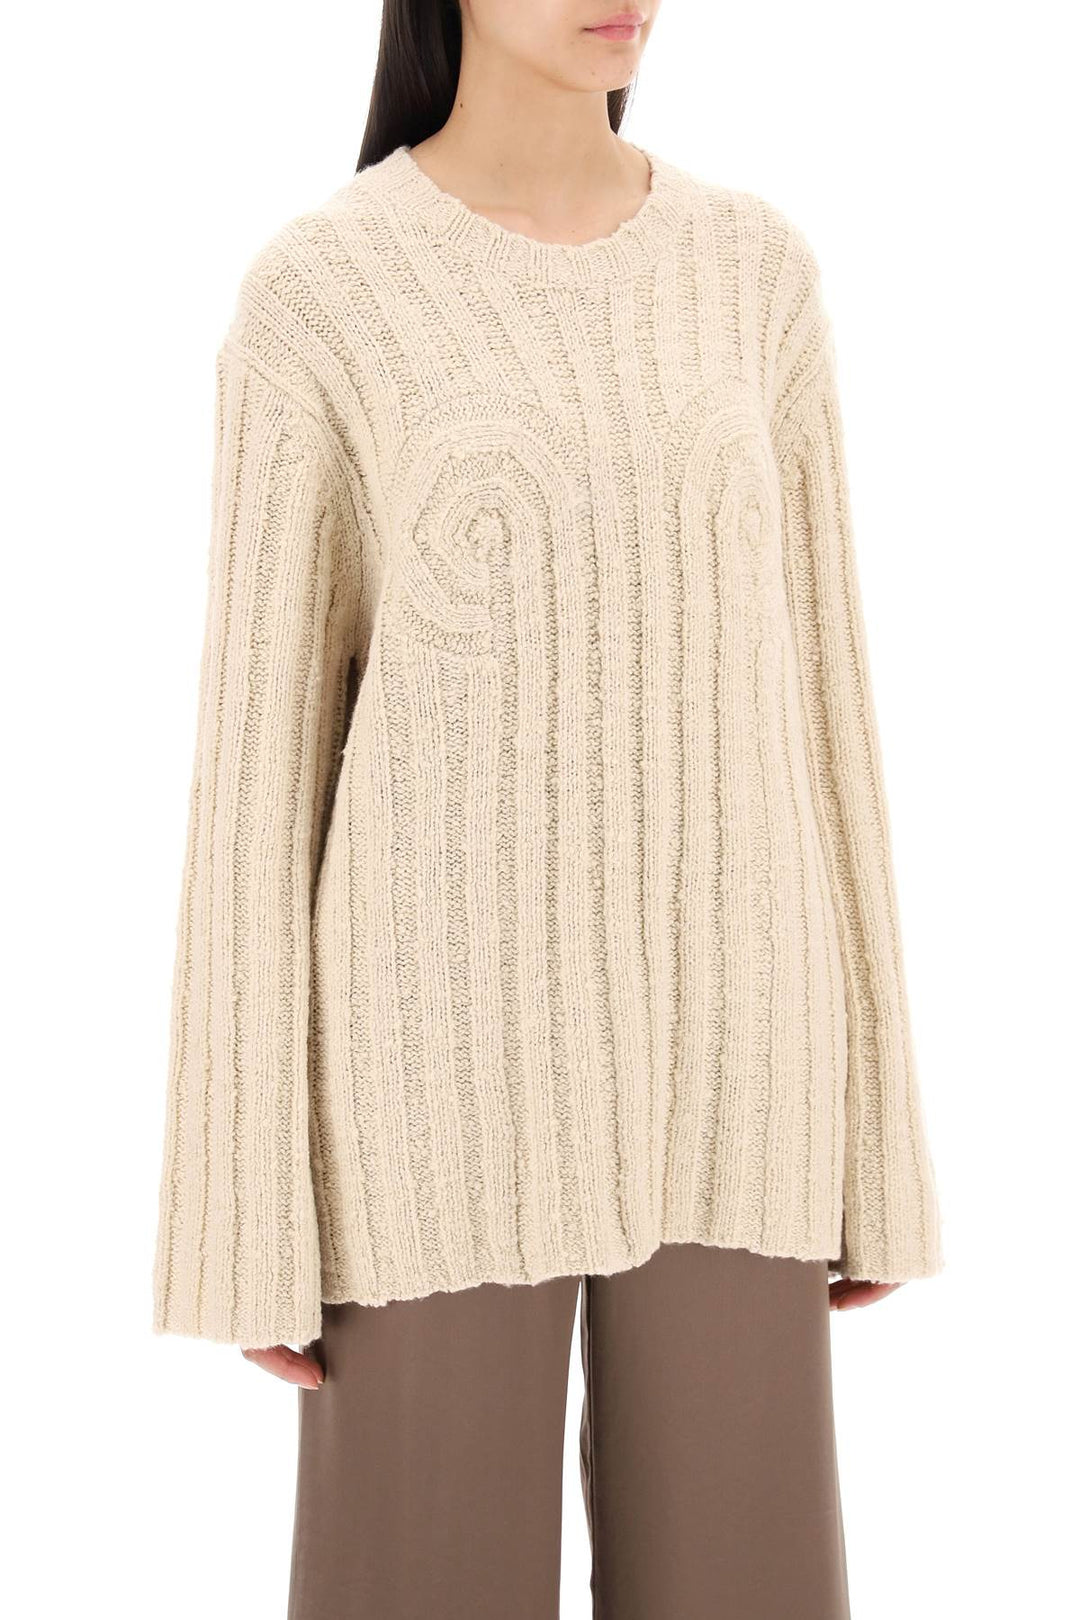 By Malene Birger Cirra Ribbed Knit Pullover   Beige